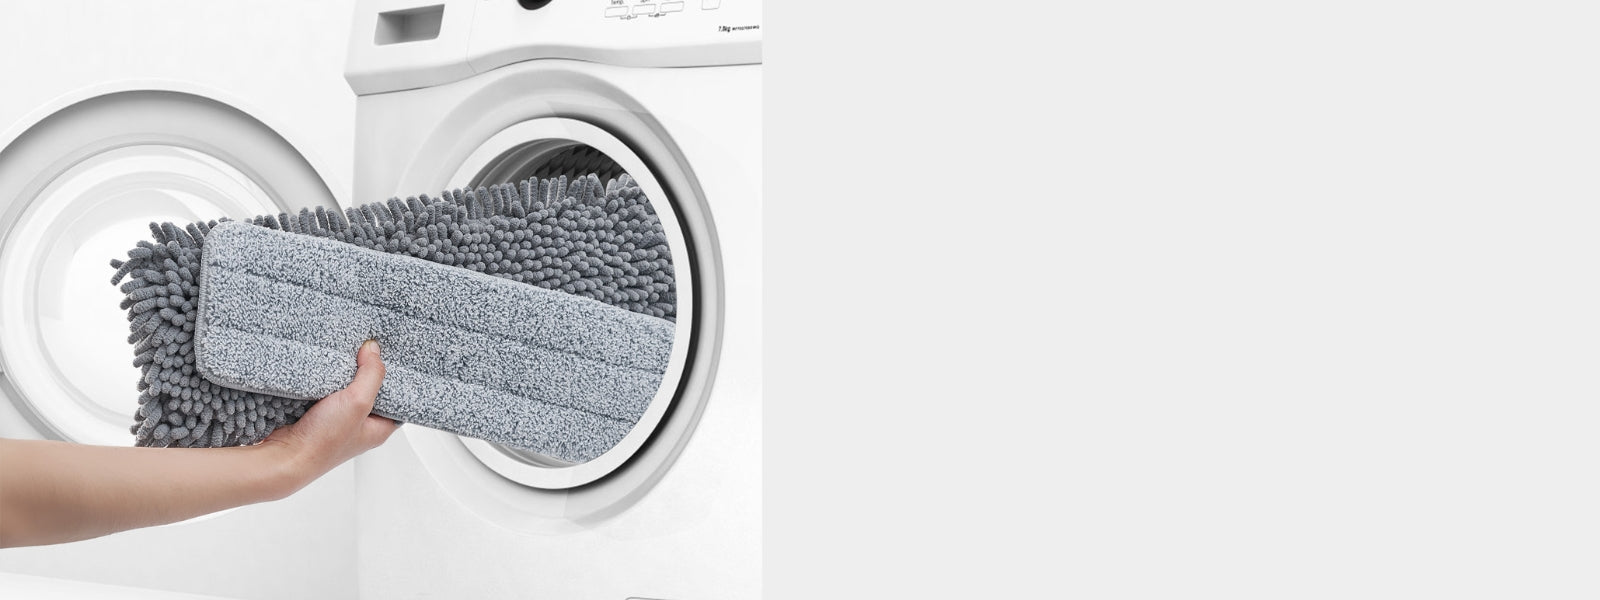 mop pads being placed in washing machine